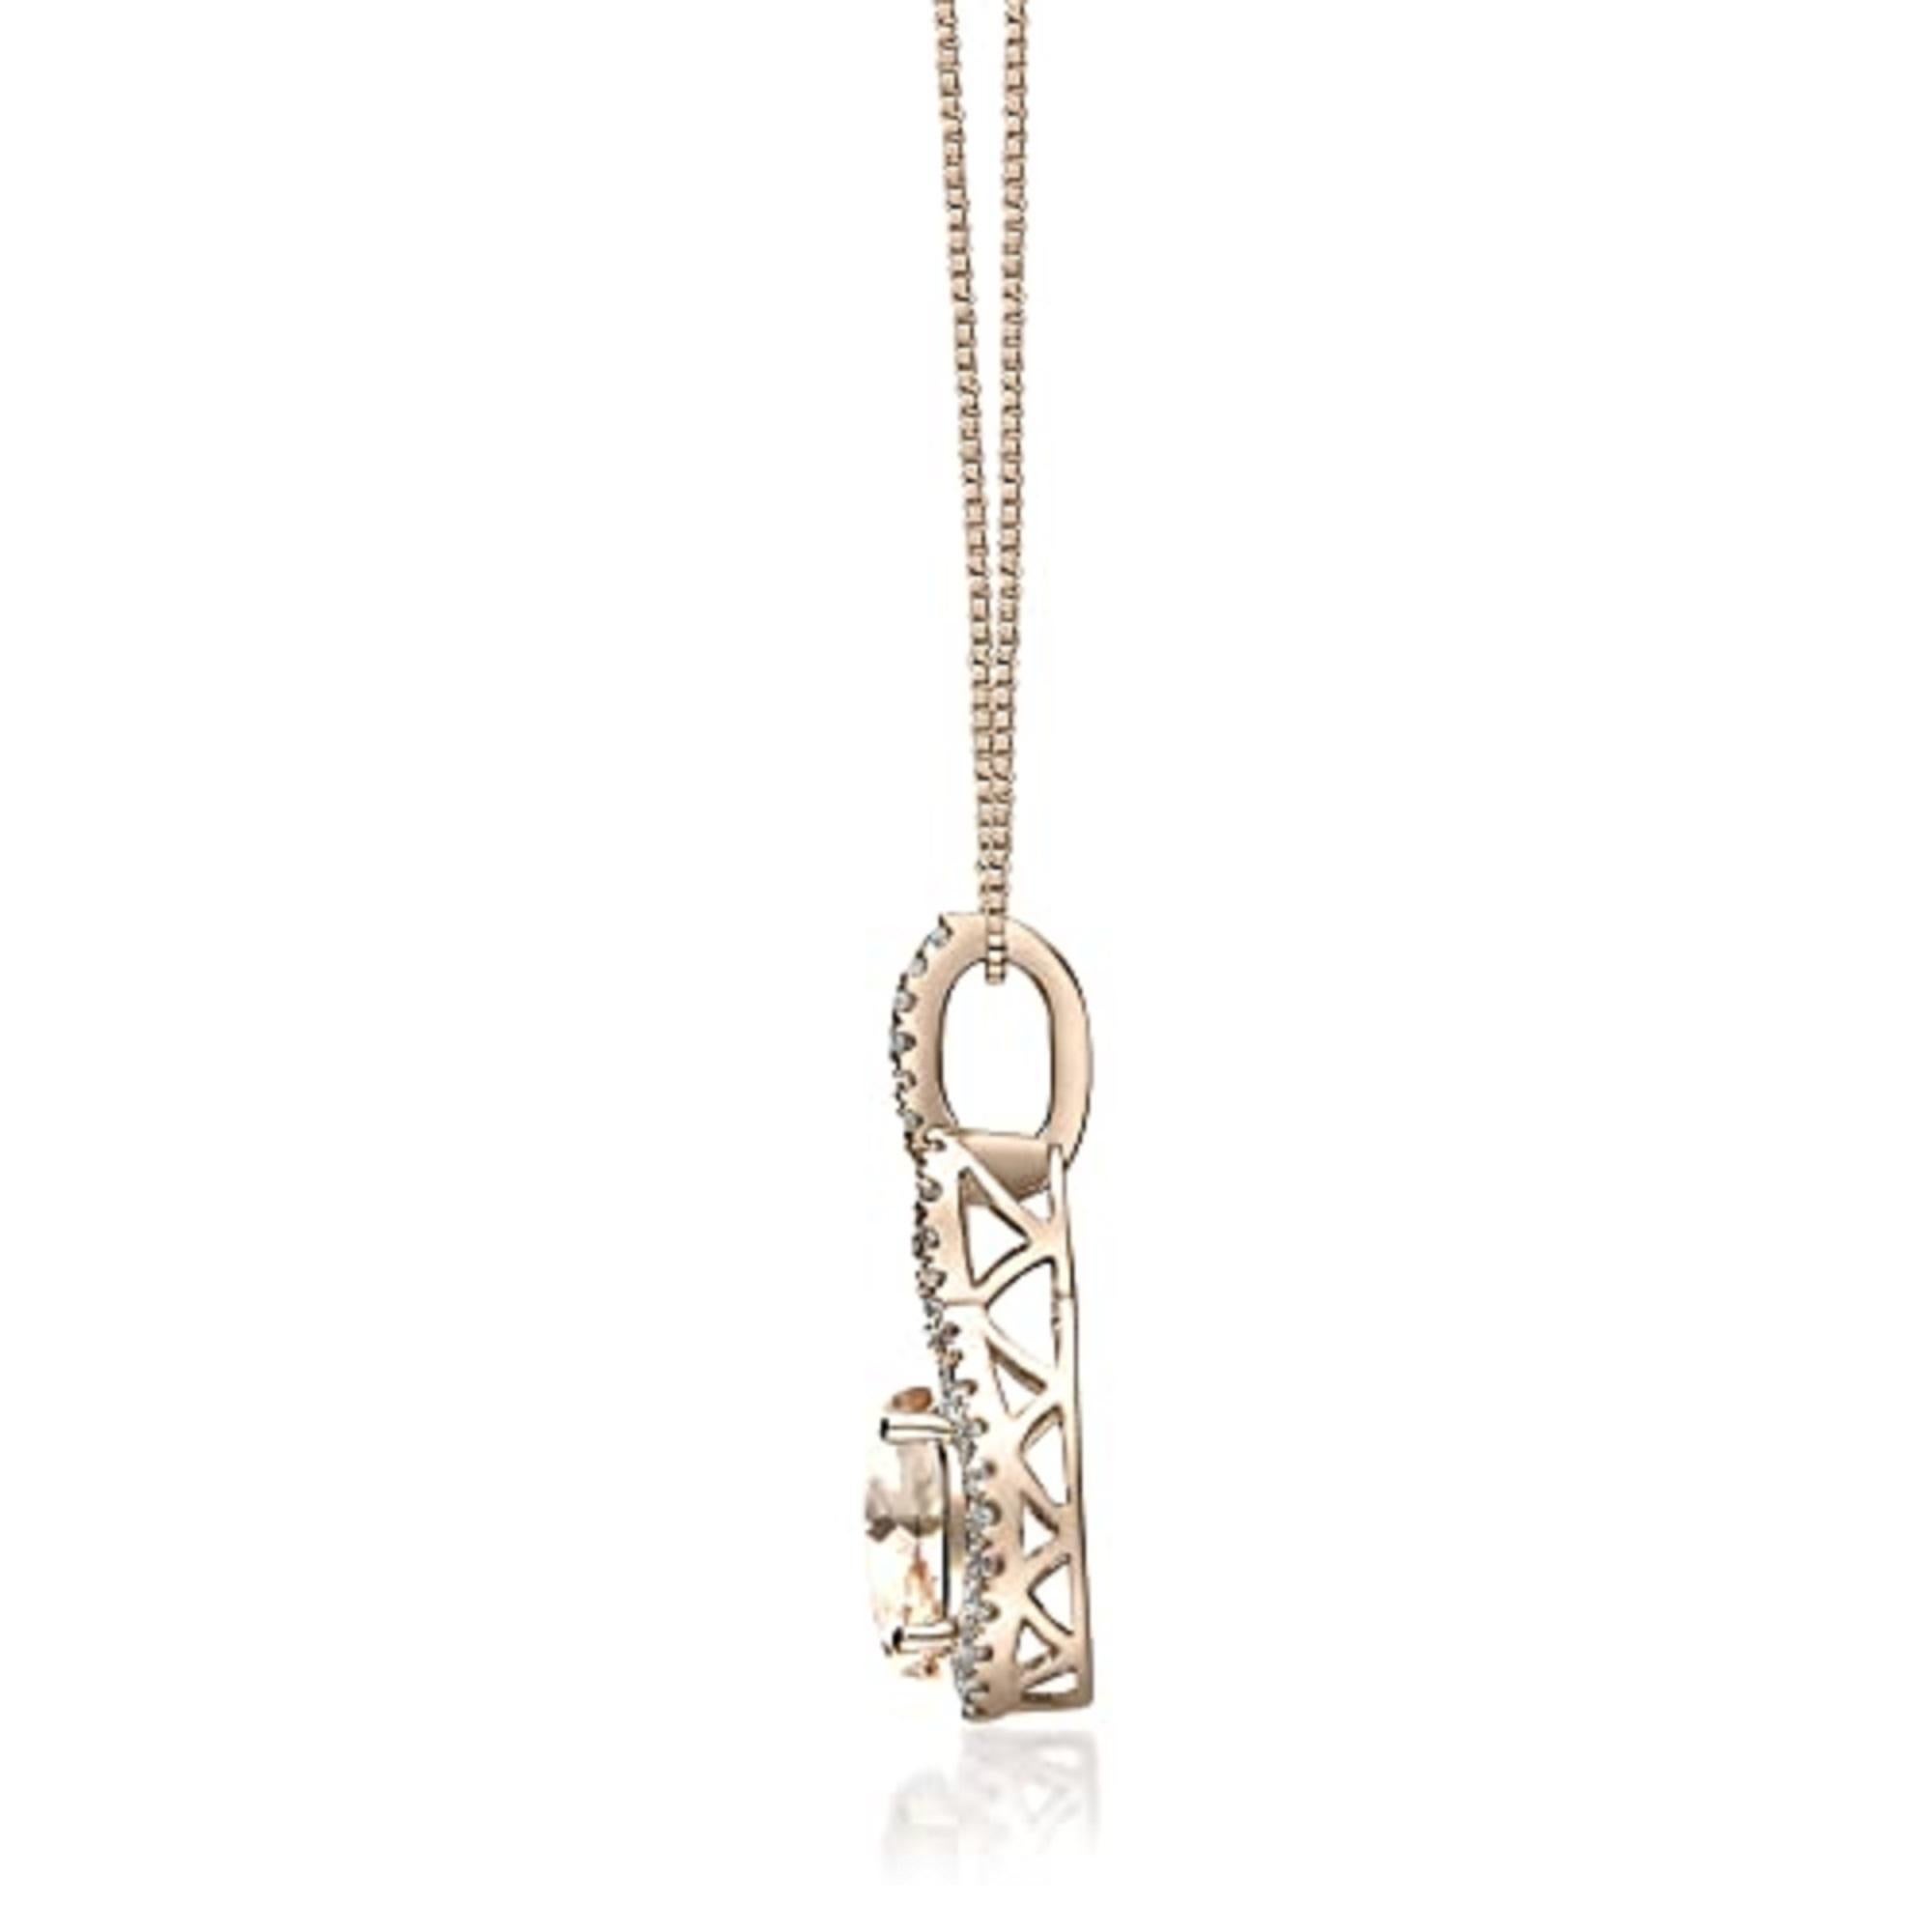 A Oval-cut Gin & Grace Genuine Morganite is placed at the bottom of this pendant for sparkle and color completed with one single brilliant Natural diamond . This necklace is polished and features a secure spring ring clasp. Details 1 prong-set